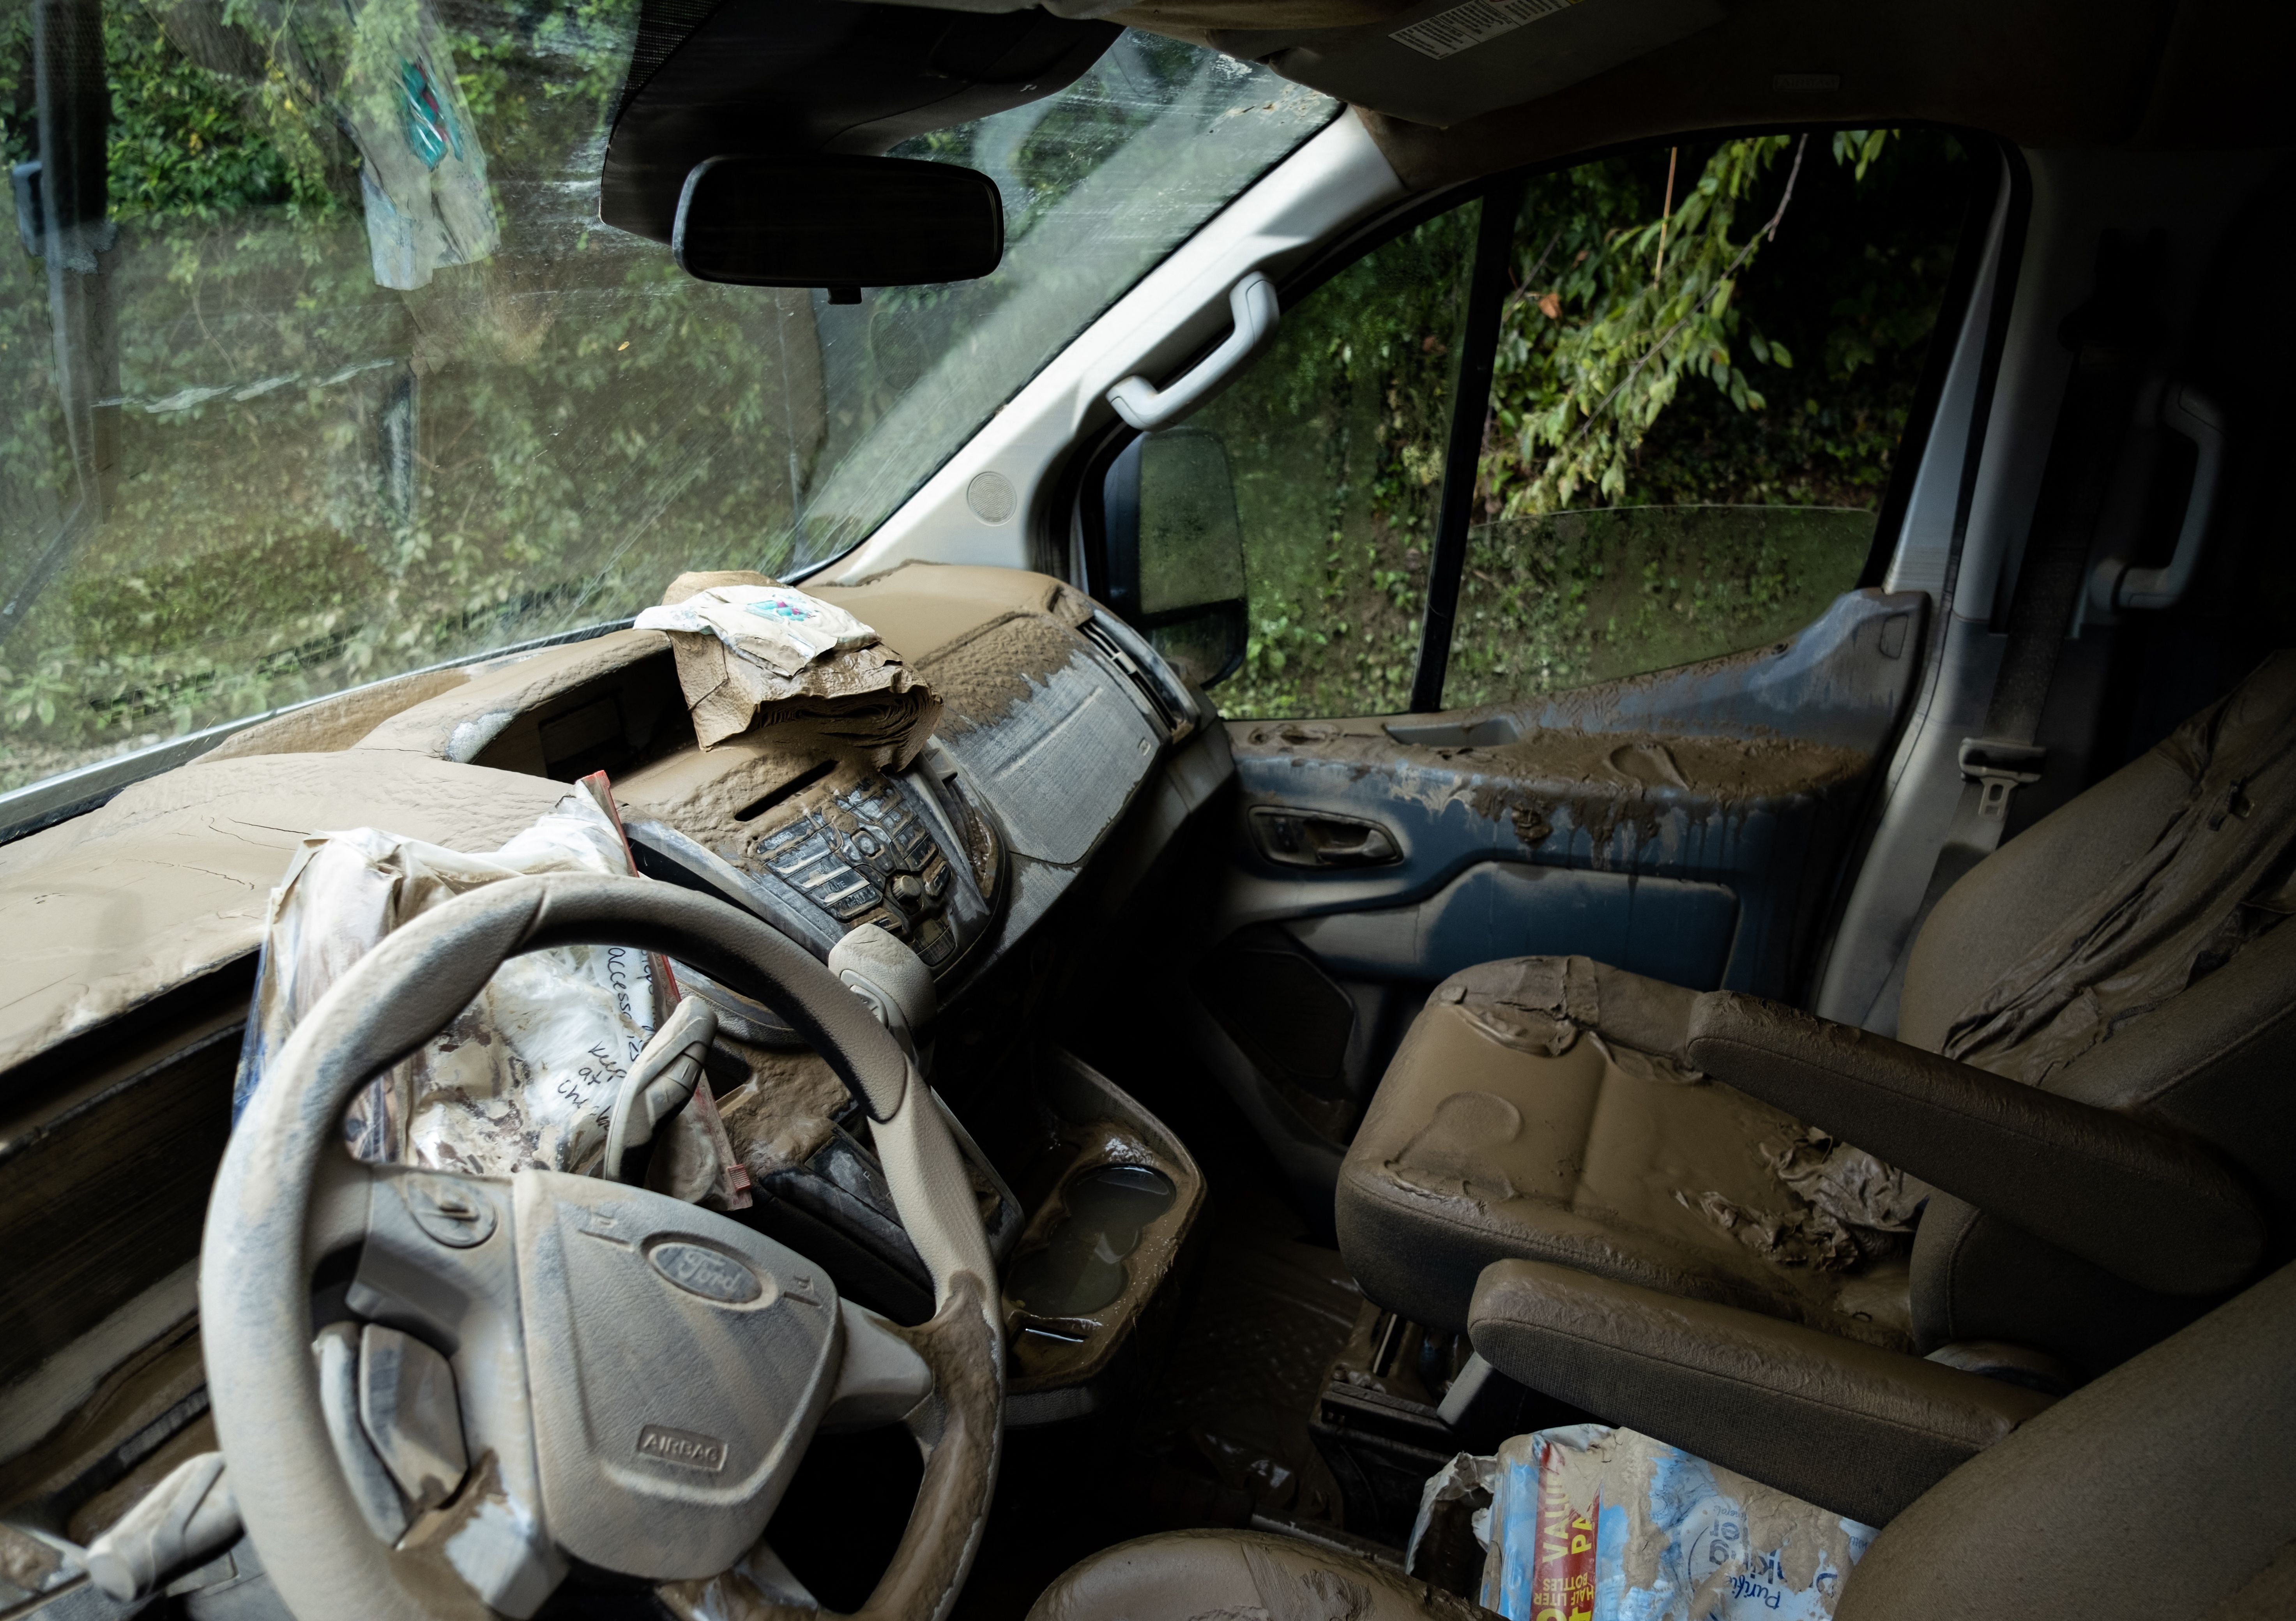 Mud is seen inside a water-damaged car in the aftermath of historic  flooding in Eastern Kentucky near Jackson, Kentucky on July 31, 2022. (Photo: Seth Herald / AFP, Getty Images)